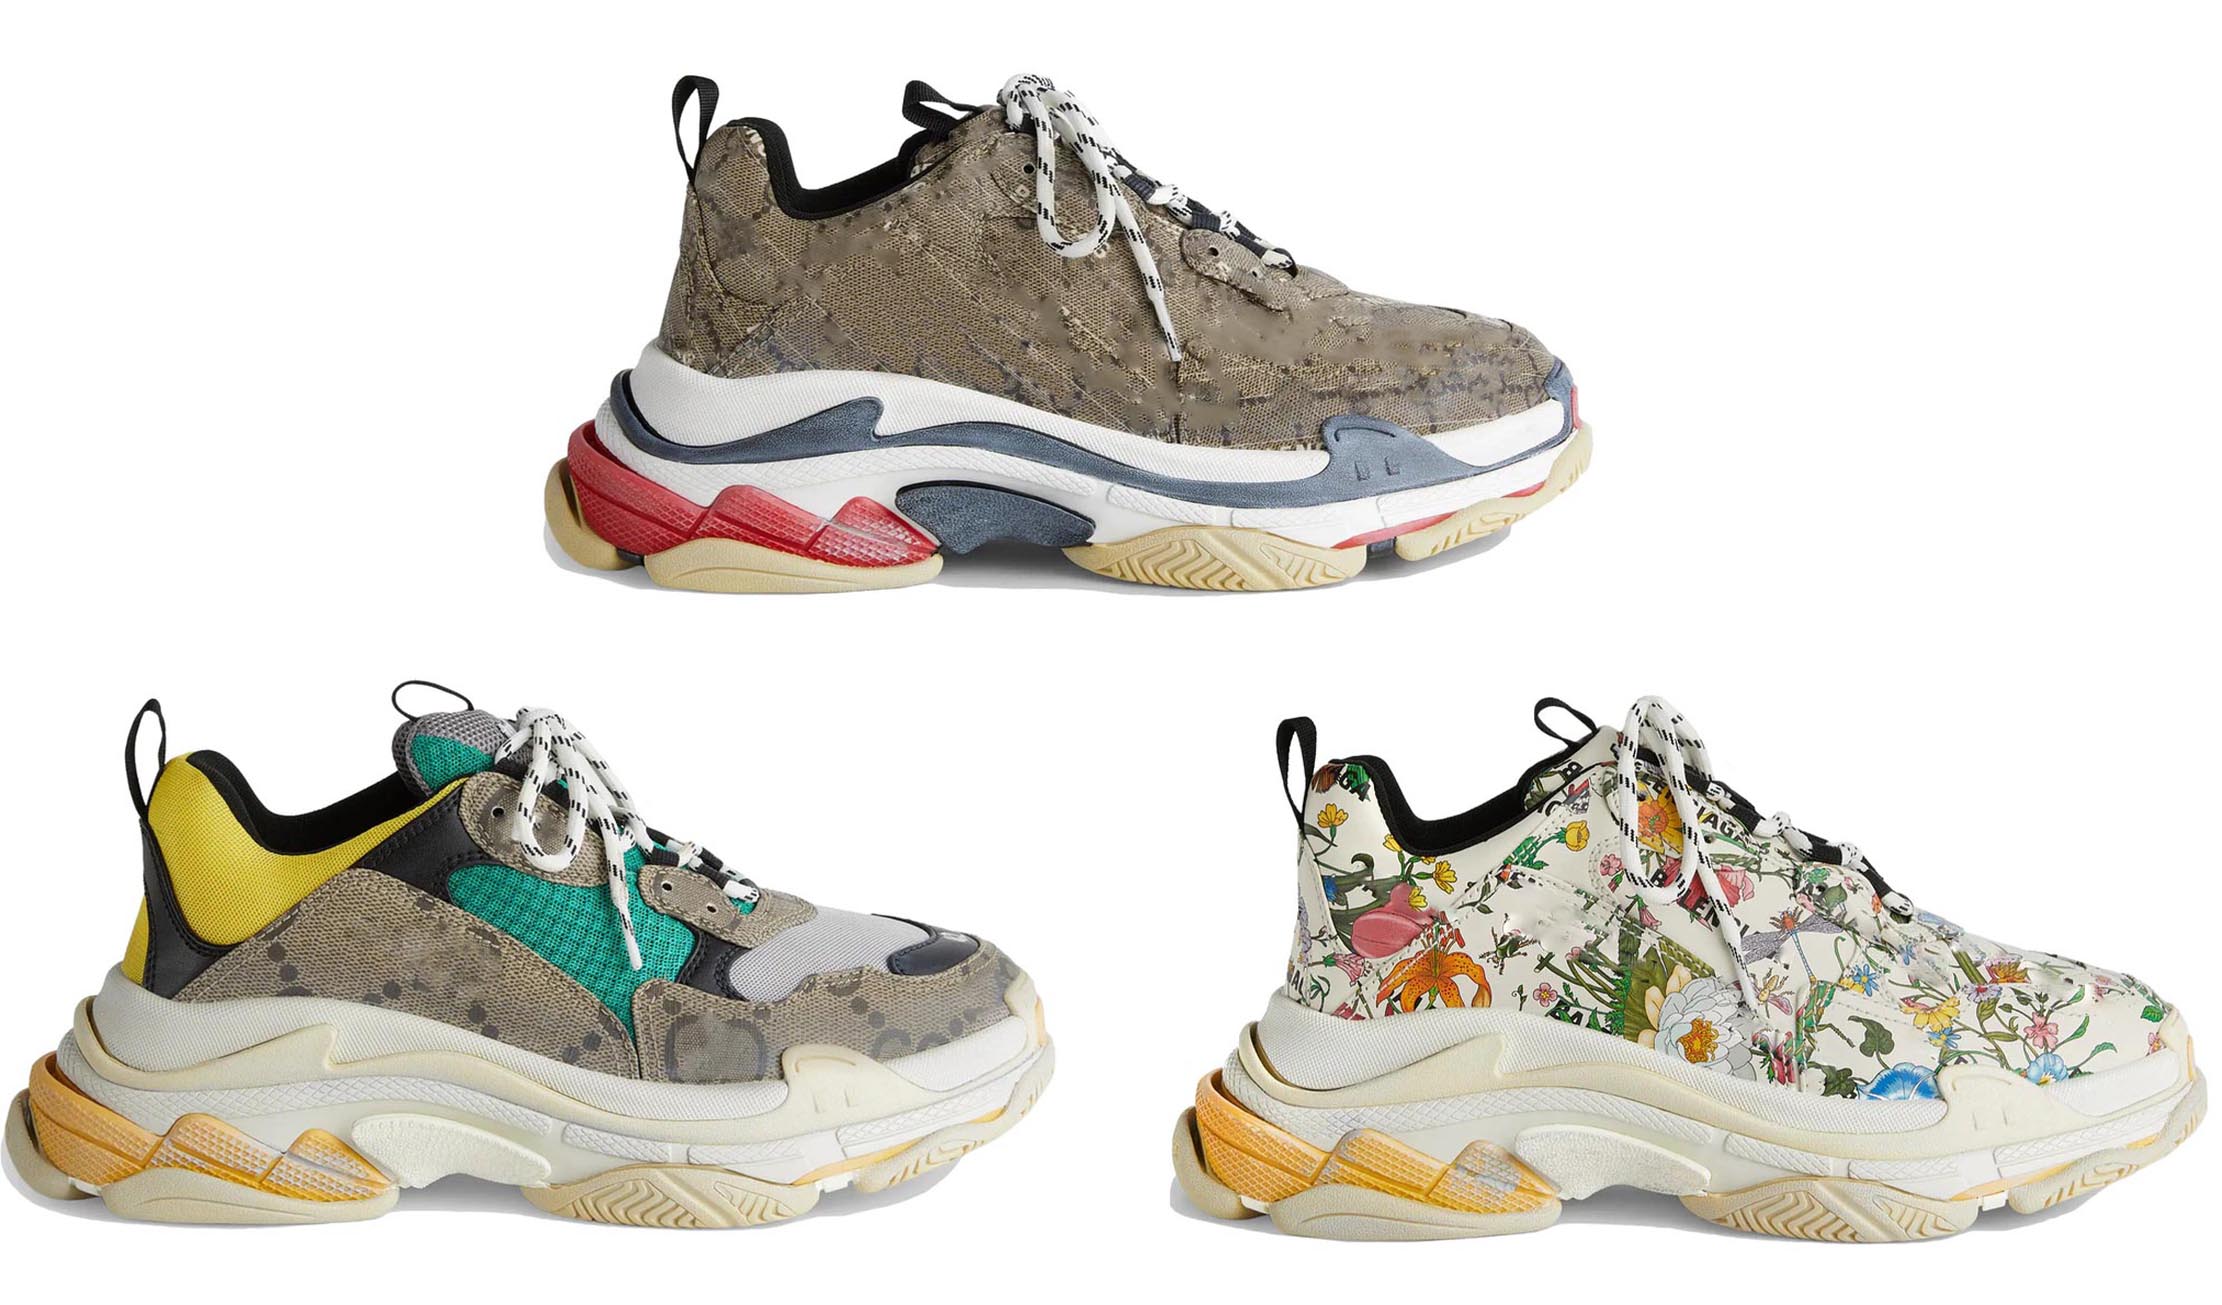 

Authentic The Hacker Project Triple S Shoes Beige Green Yellow Flora Print Men Women Trainers Old Dad Platform Sneakers Paris 17FW Sports With Original Box Size 36-46